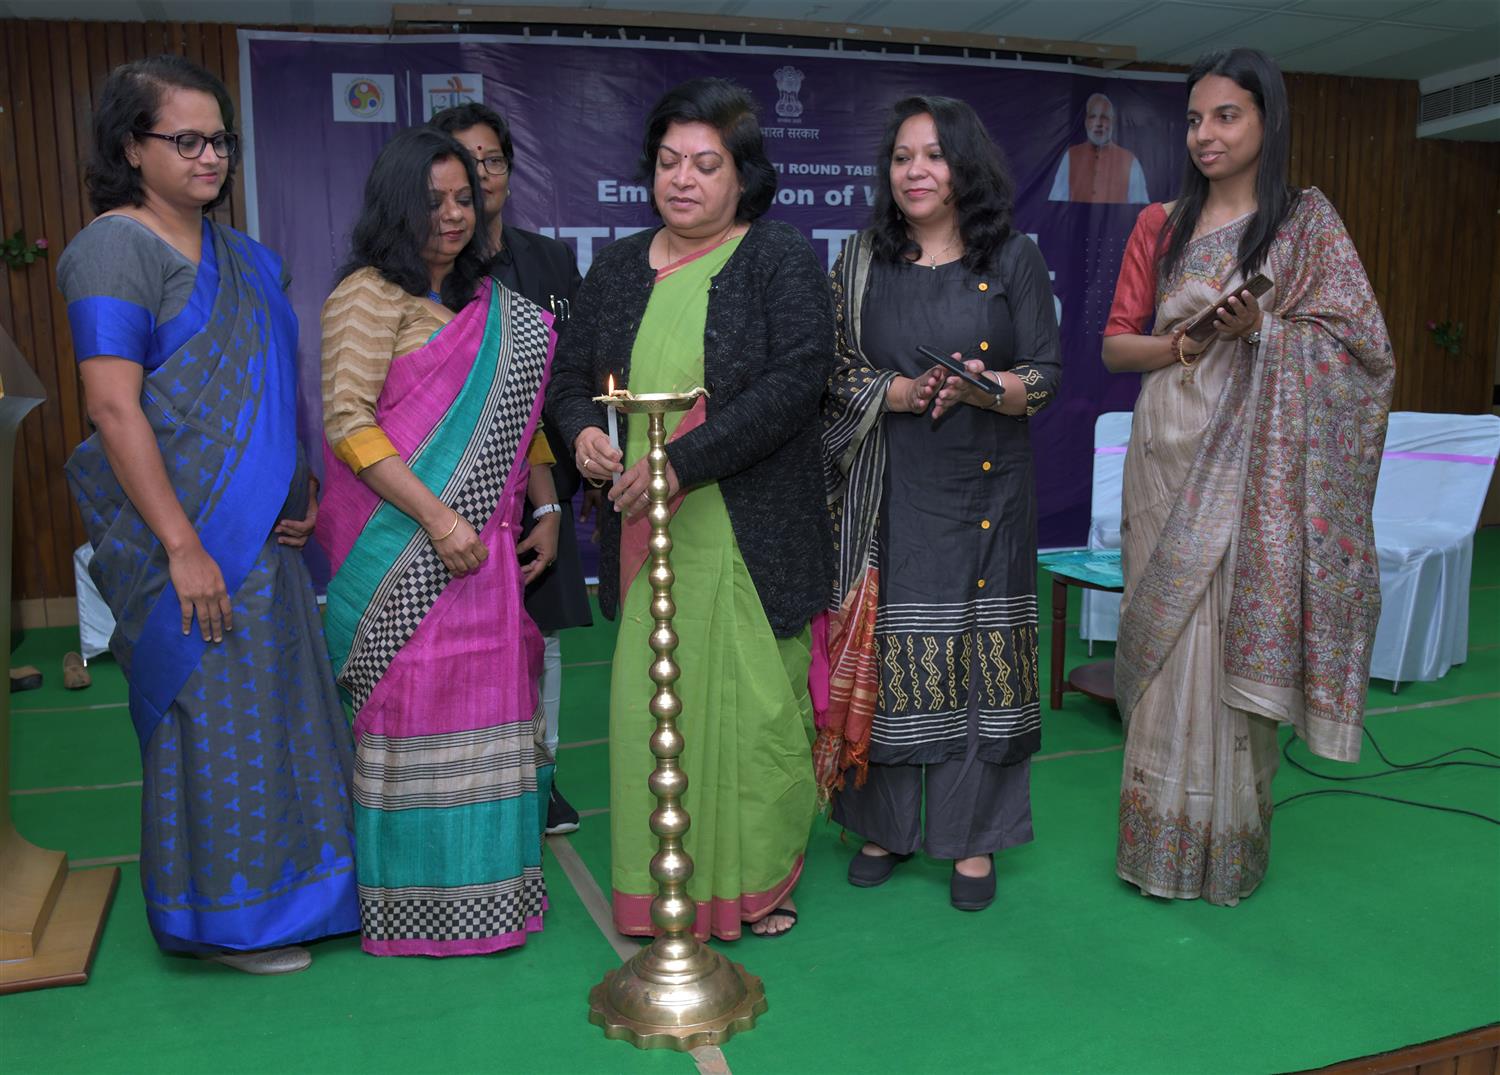 Dr. Chitralekha Mahanta, Dean, IIT Guwahati lighting the lamp to inaugurate Round  Table conference  on Women’s Emancipation in the Run-up to International Women’s Day 2020 , organized by Press Information Bureau, Ministry of Information & Broadcasting, Guwahati in collaboration with Indian Institute of Technology, Guwahati on 5th March 2020. Smt. Sumitra Sharma, Advocate Smt. Mili Hazarika, Senior Advocate Smt. Durba Dutta Lecturer, Royal Golobal University and Dr. Rajshree Bedamatta Associate Prof.IIT, Guwahati are also seen in the picture .